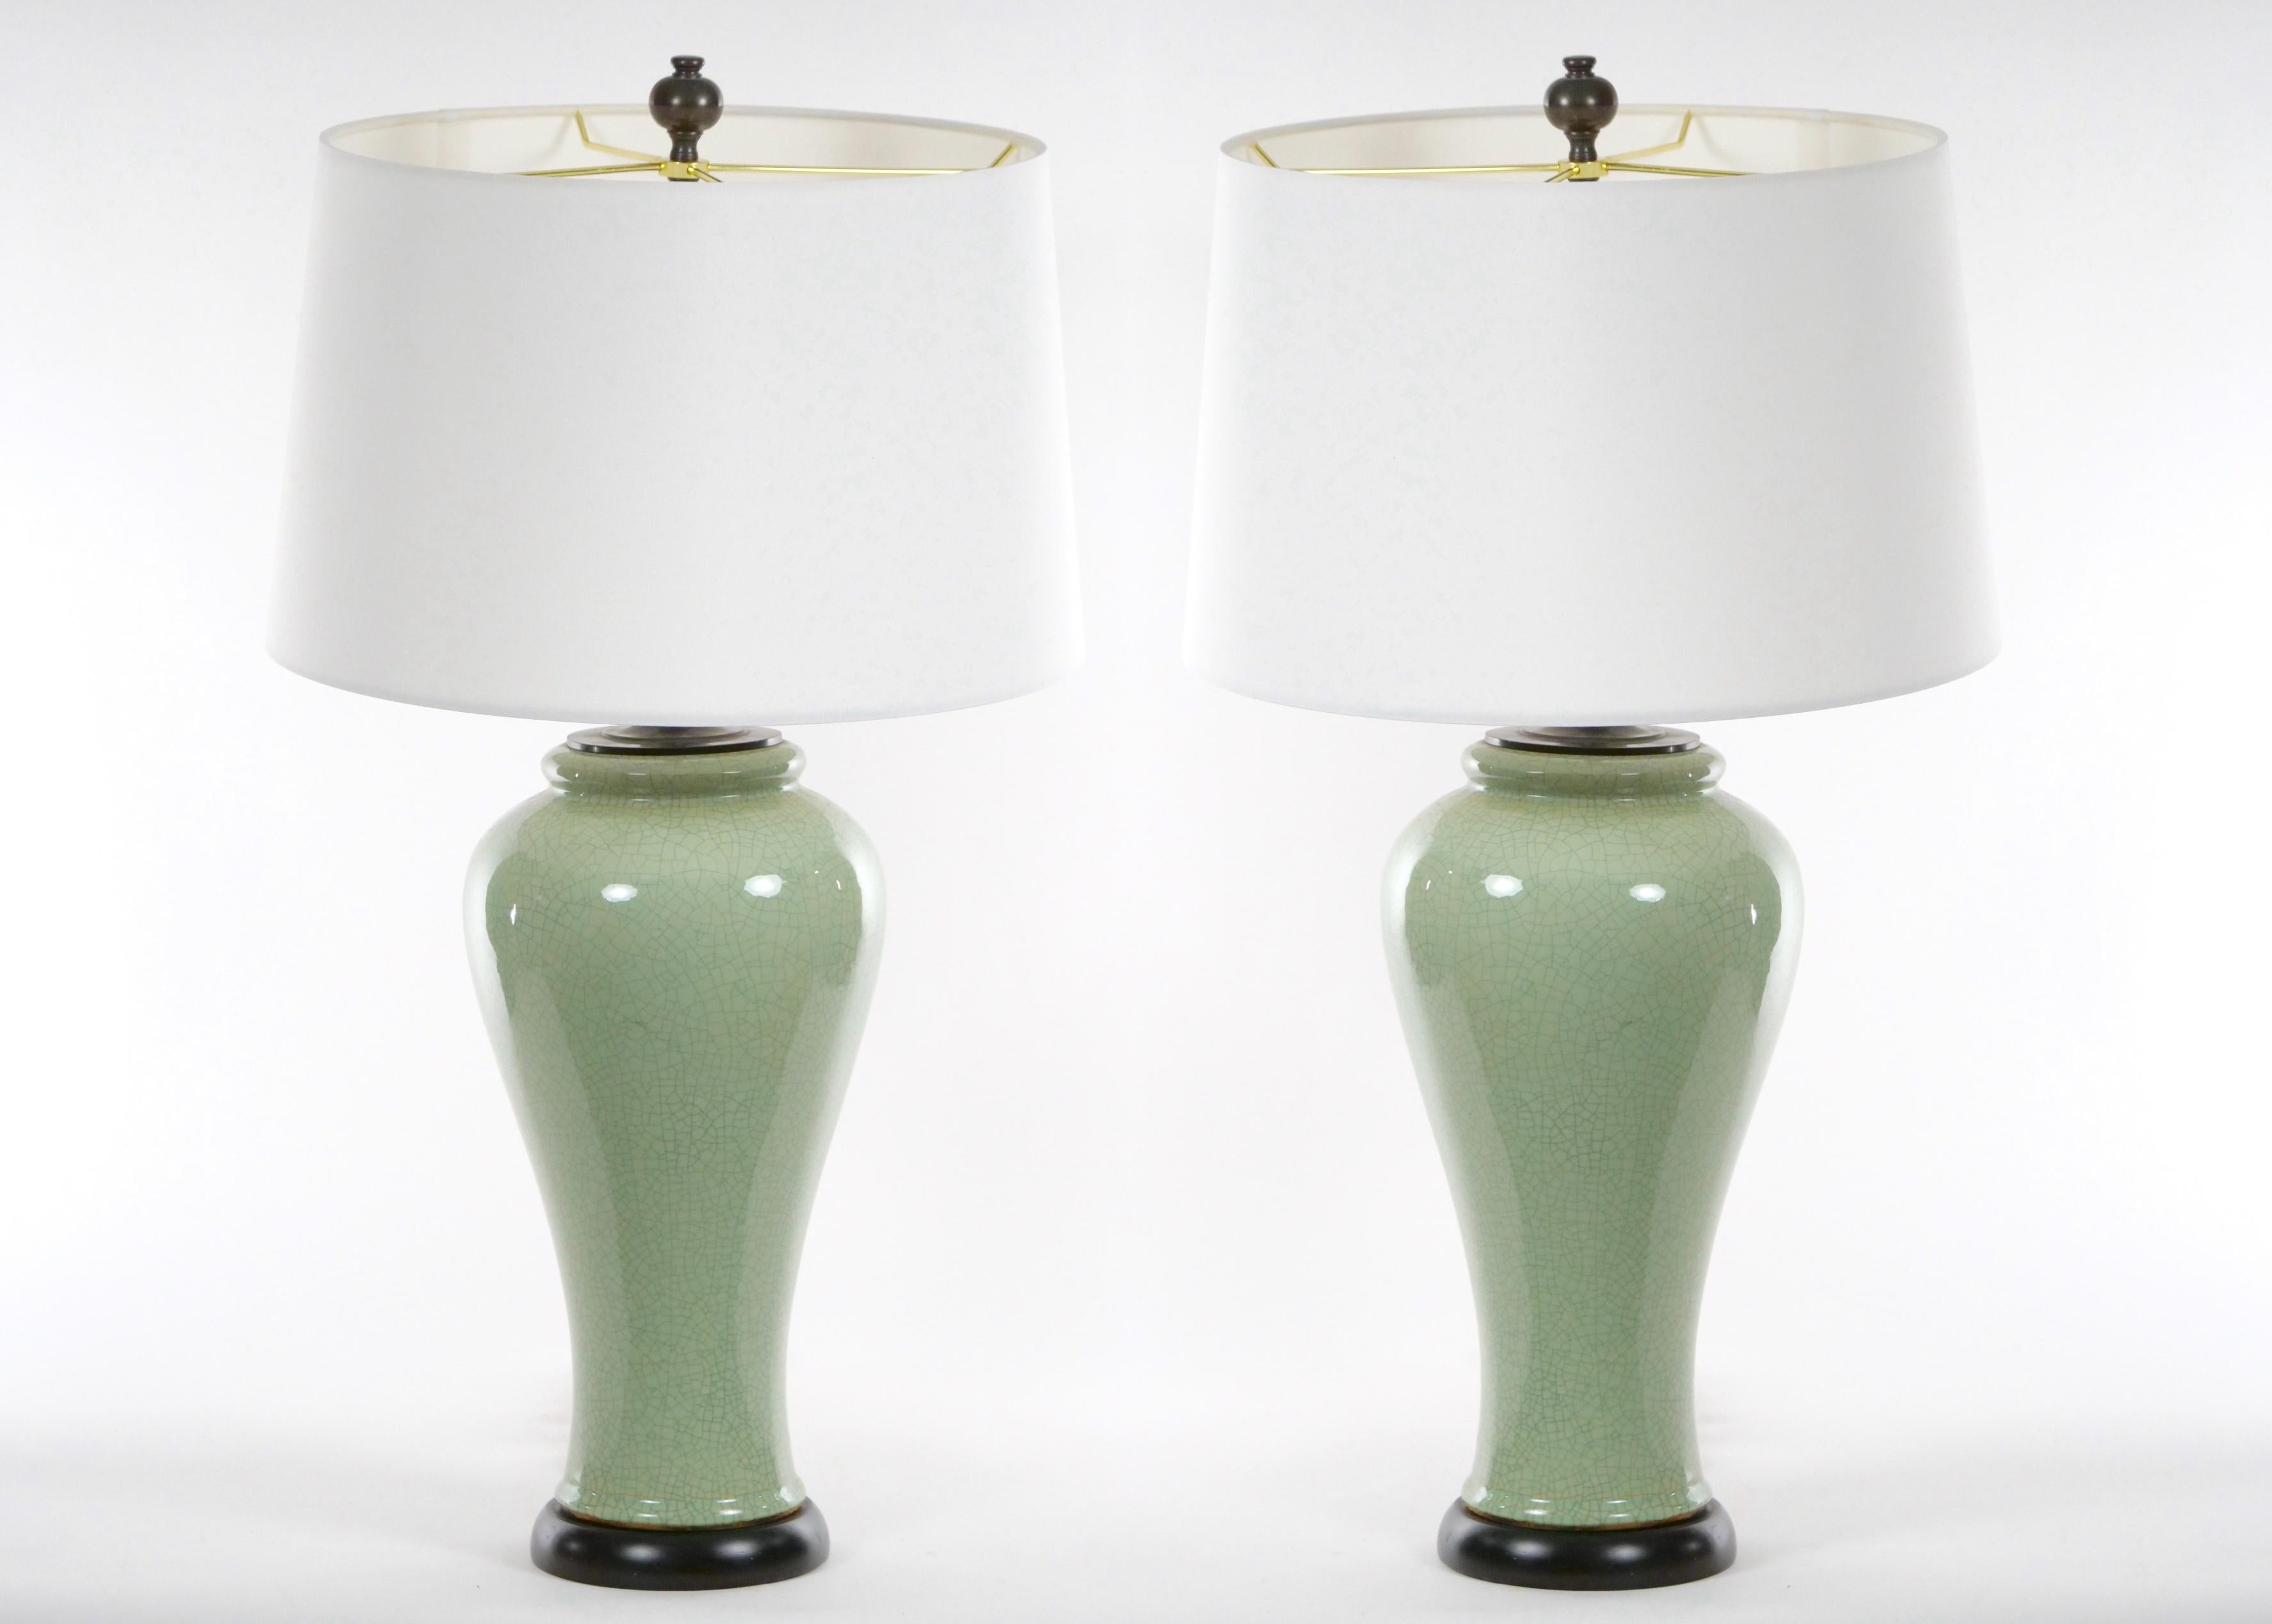 Mid-20th century pair of Chinese celadon green crackle porcelain baluster form vase table lamp with painted round wooden base. Each lamp is in great working condition and features a dimmable switch cord. Each lamp comes with a round drum shade. Each